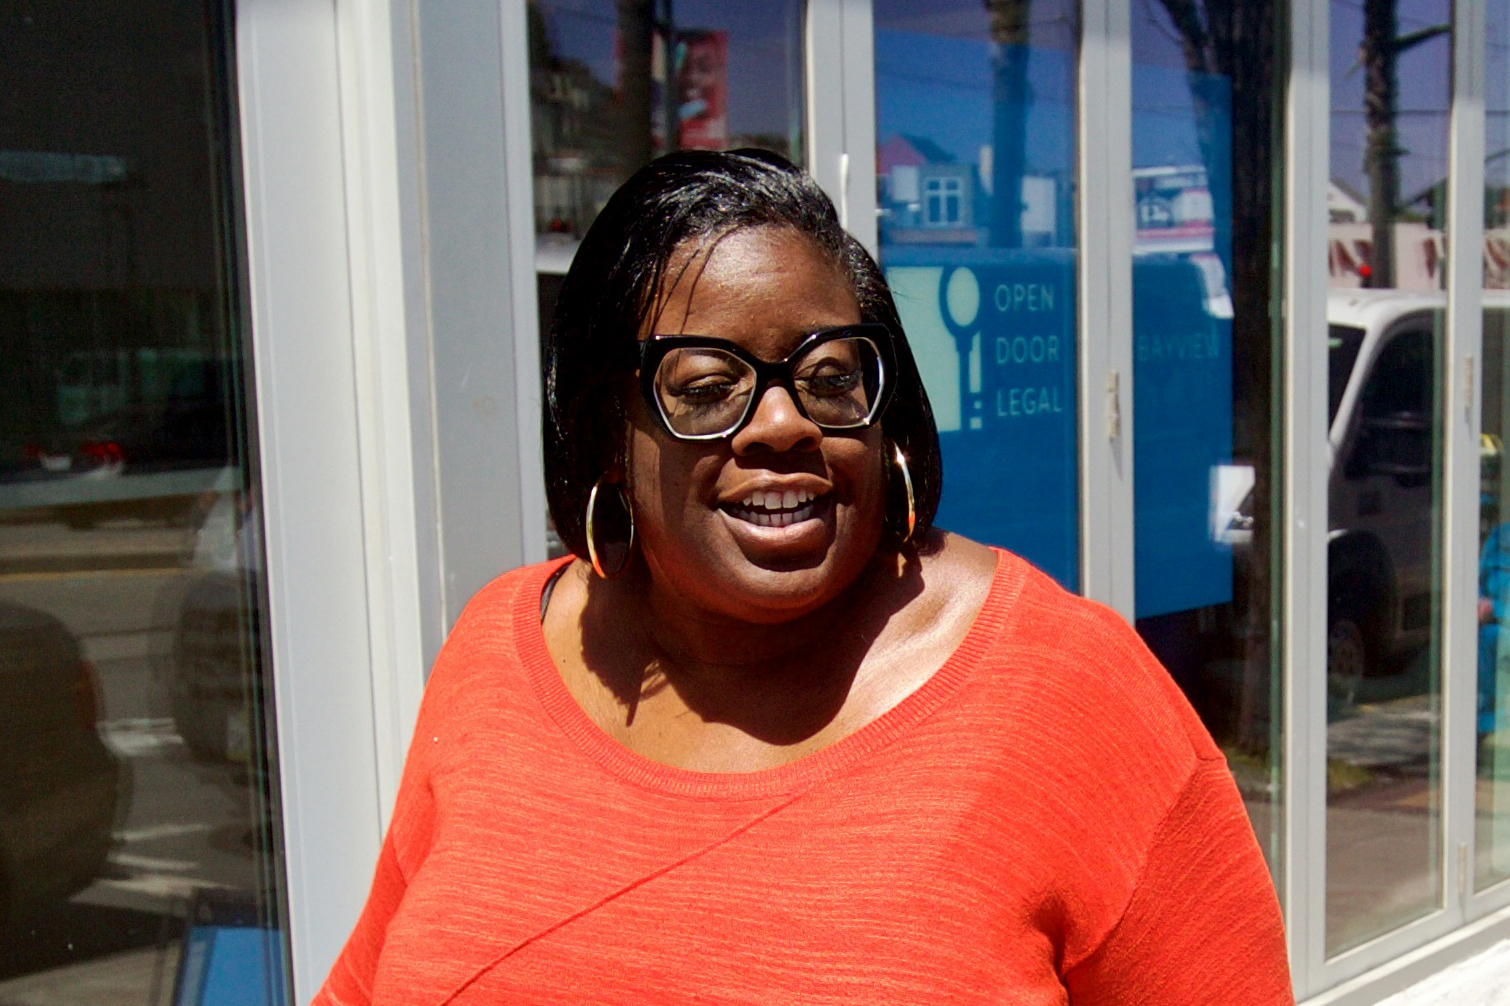 A smiling woman in an orange top with glasses and hoop earrings stands in front of a window with blue signage.